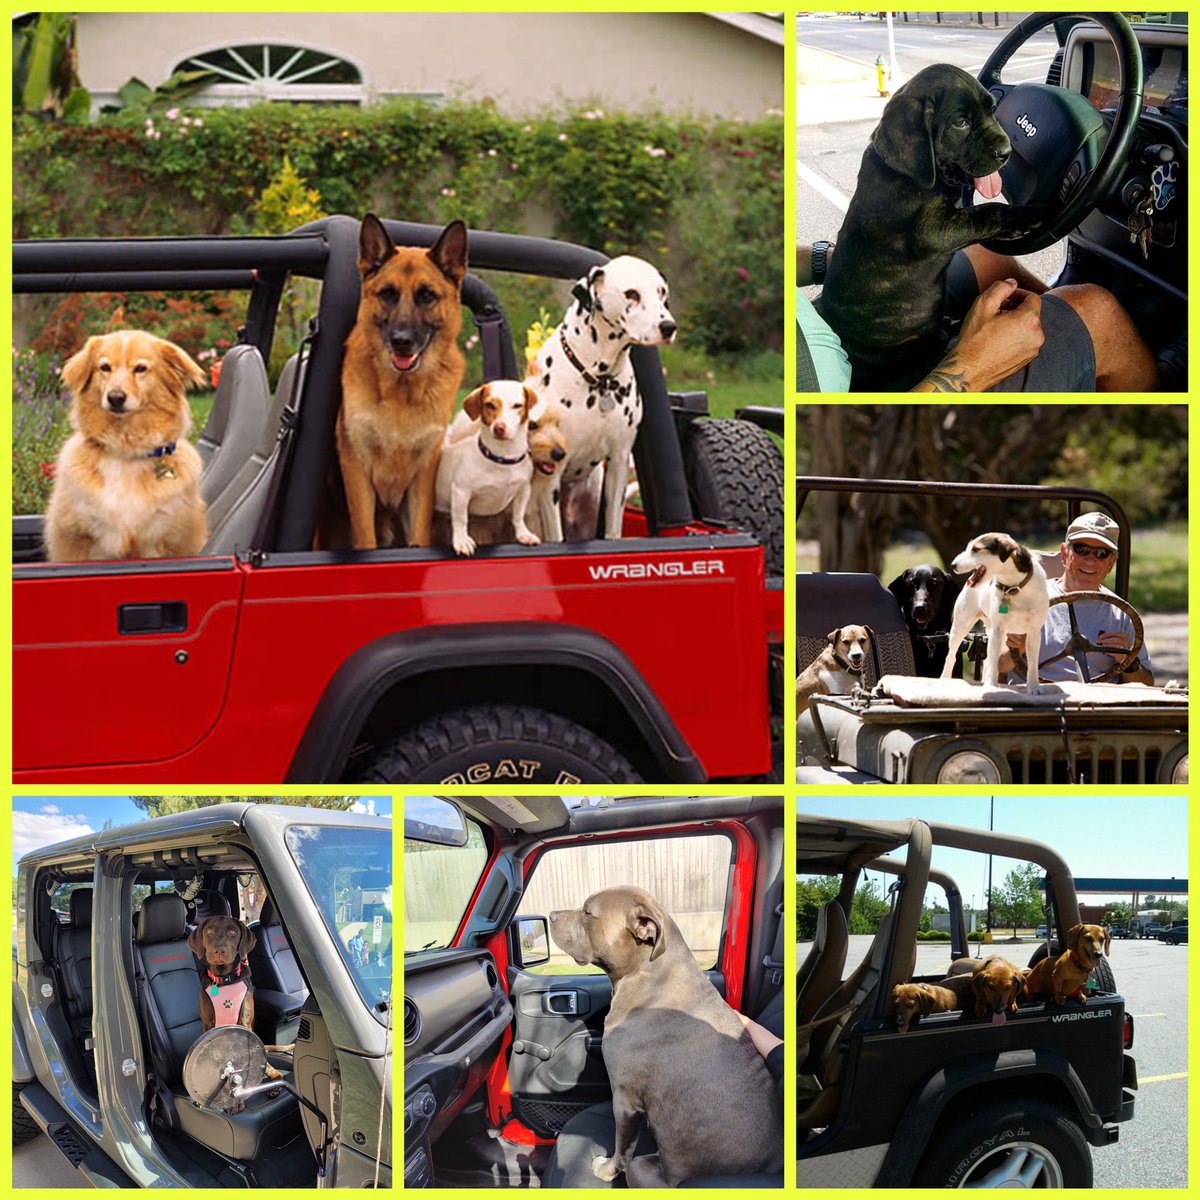 Good morning @THEJeepMafia! It’s #NationalPuppyDay and what’s better than a Jeep dog!?? Let’s see those Jeep dogs and puppies 🐶